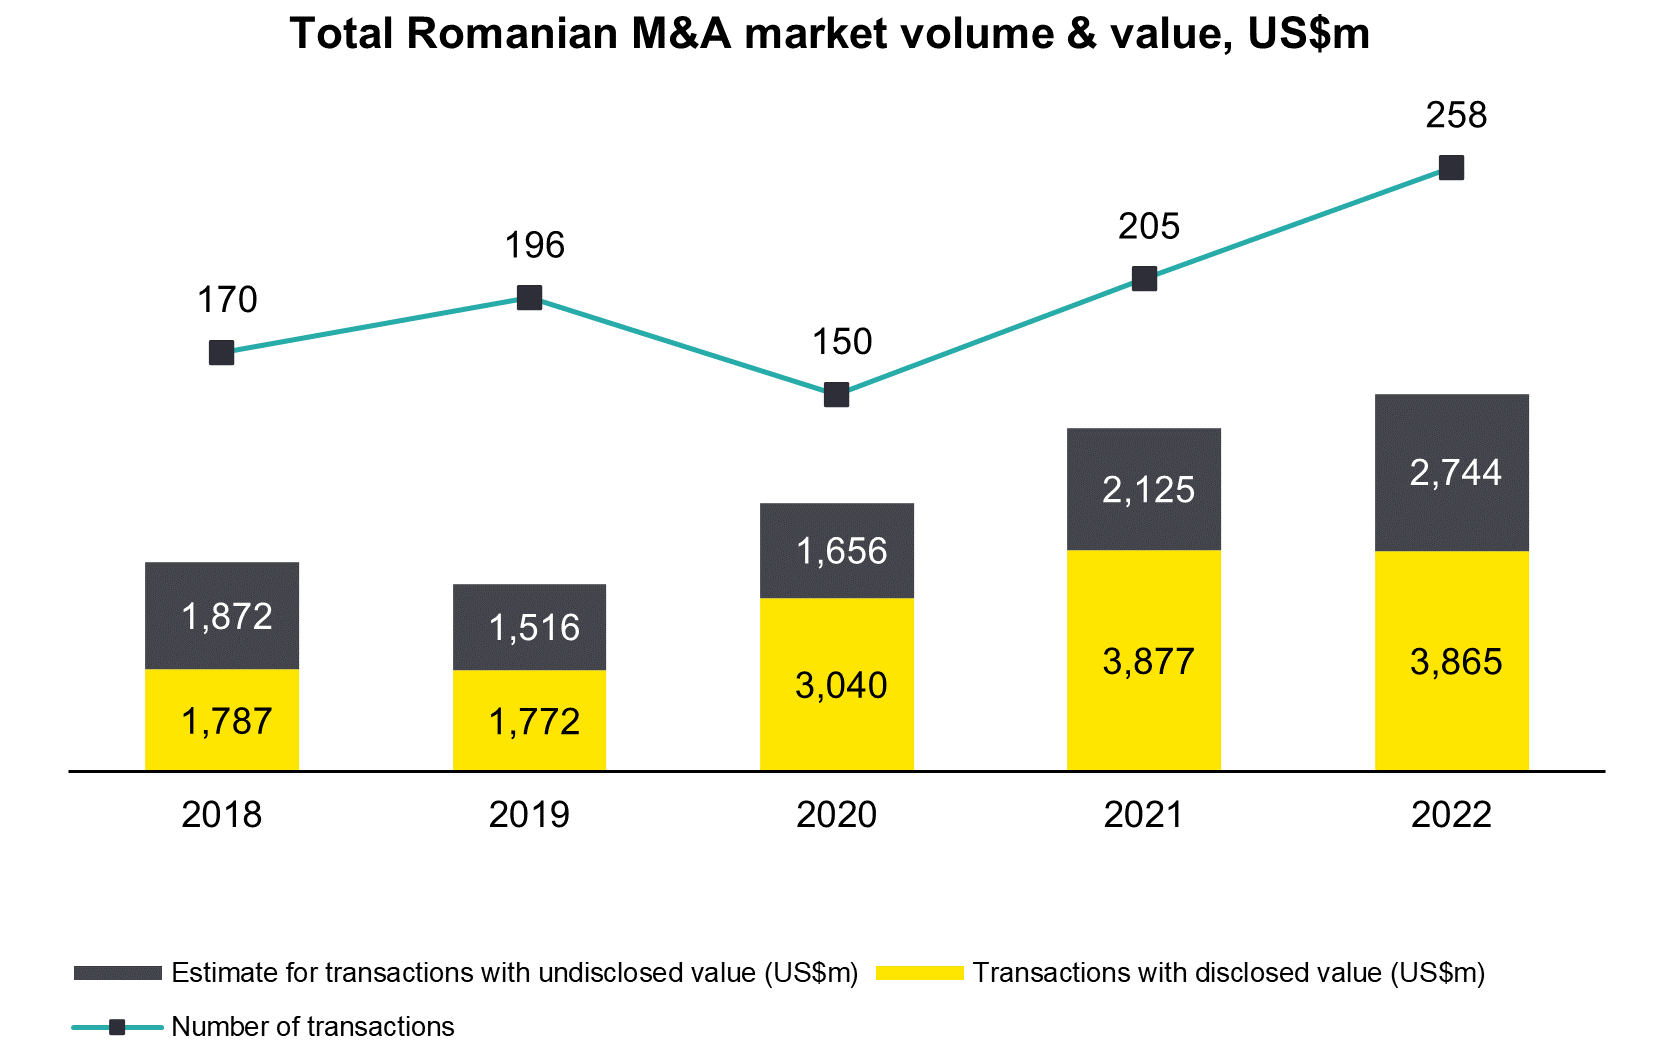 Romanian M&A market evolution during 2022